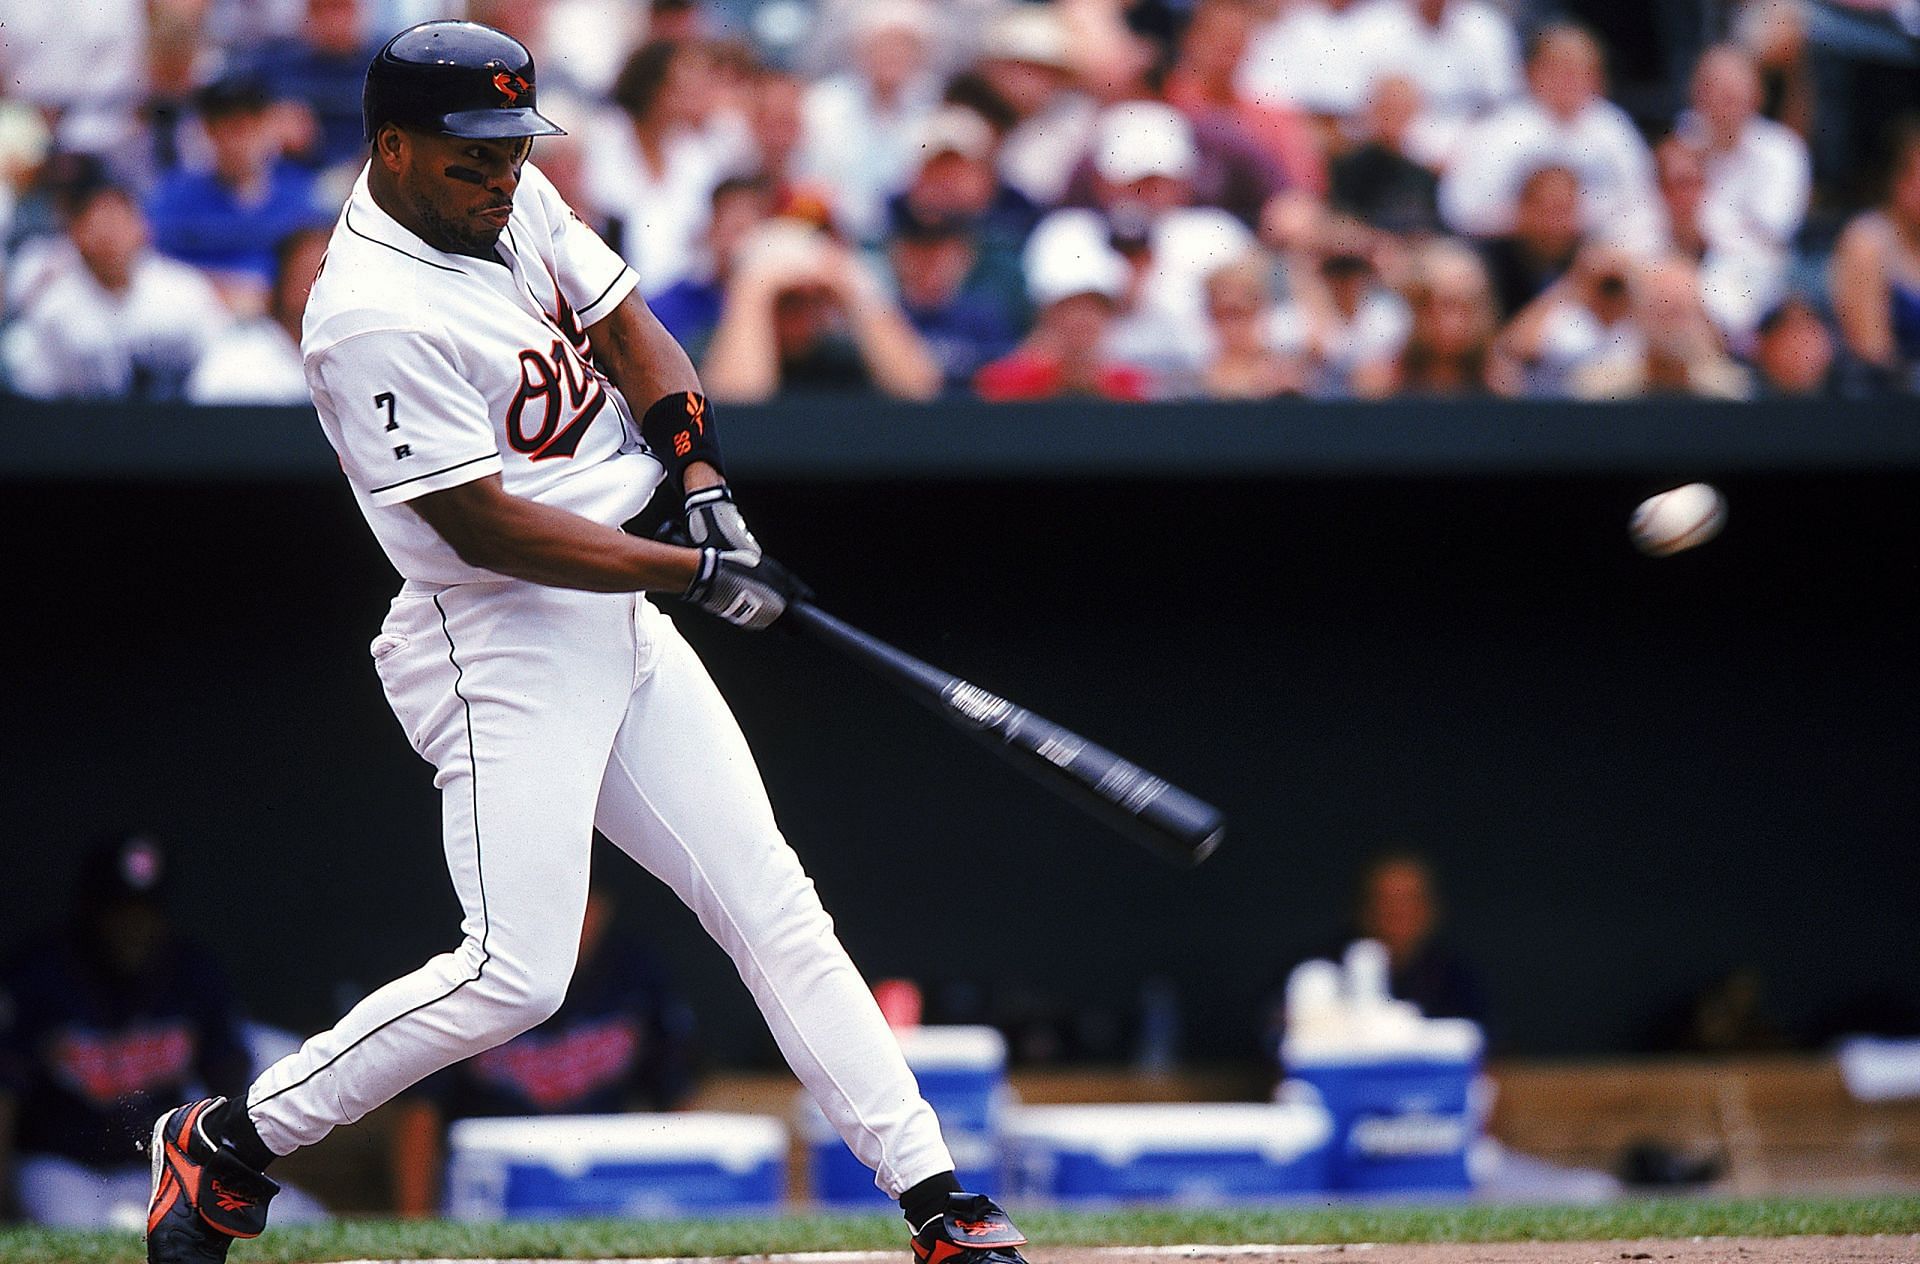 14 Sep 1999: Albert Belle #88 of the Cleveland Indians swings at the ball during the game against the Baltimore Orioles at Camden Yards in Baltimore, Maryland. The Orioles defeated the Indians 3-1. Mandatory Credit: Doug Pensinger /Allsport